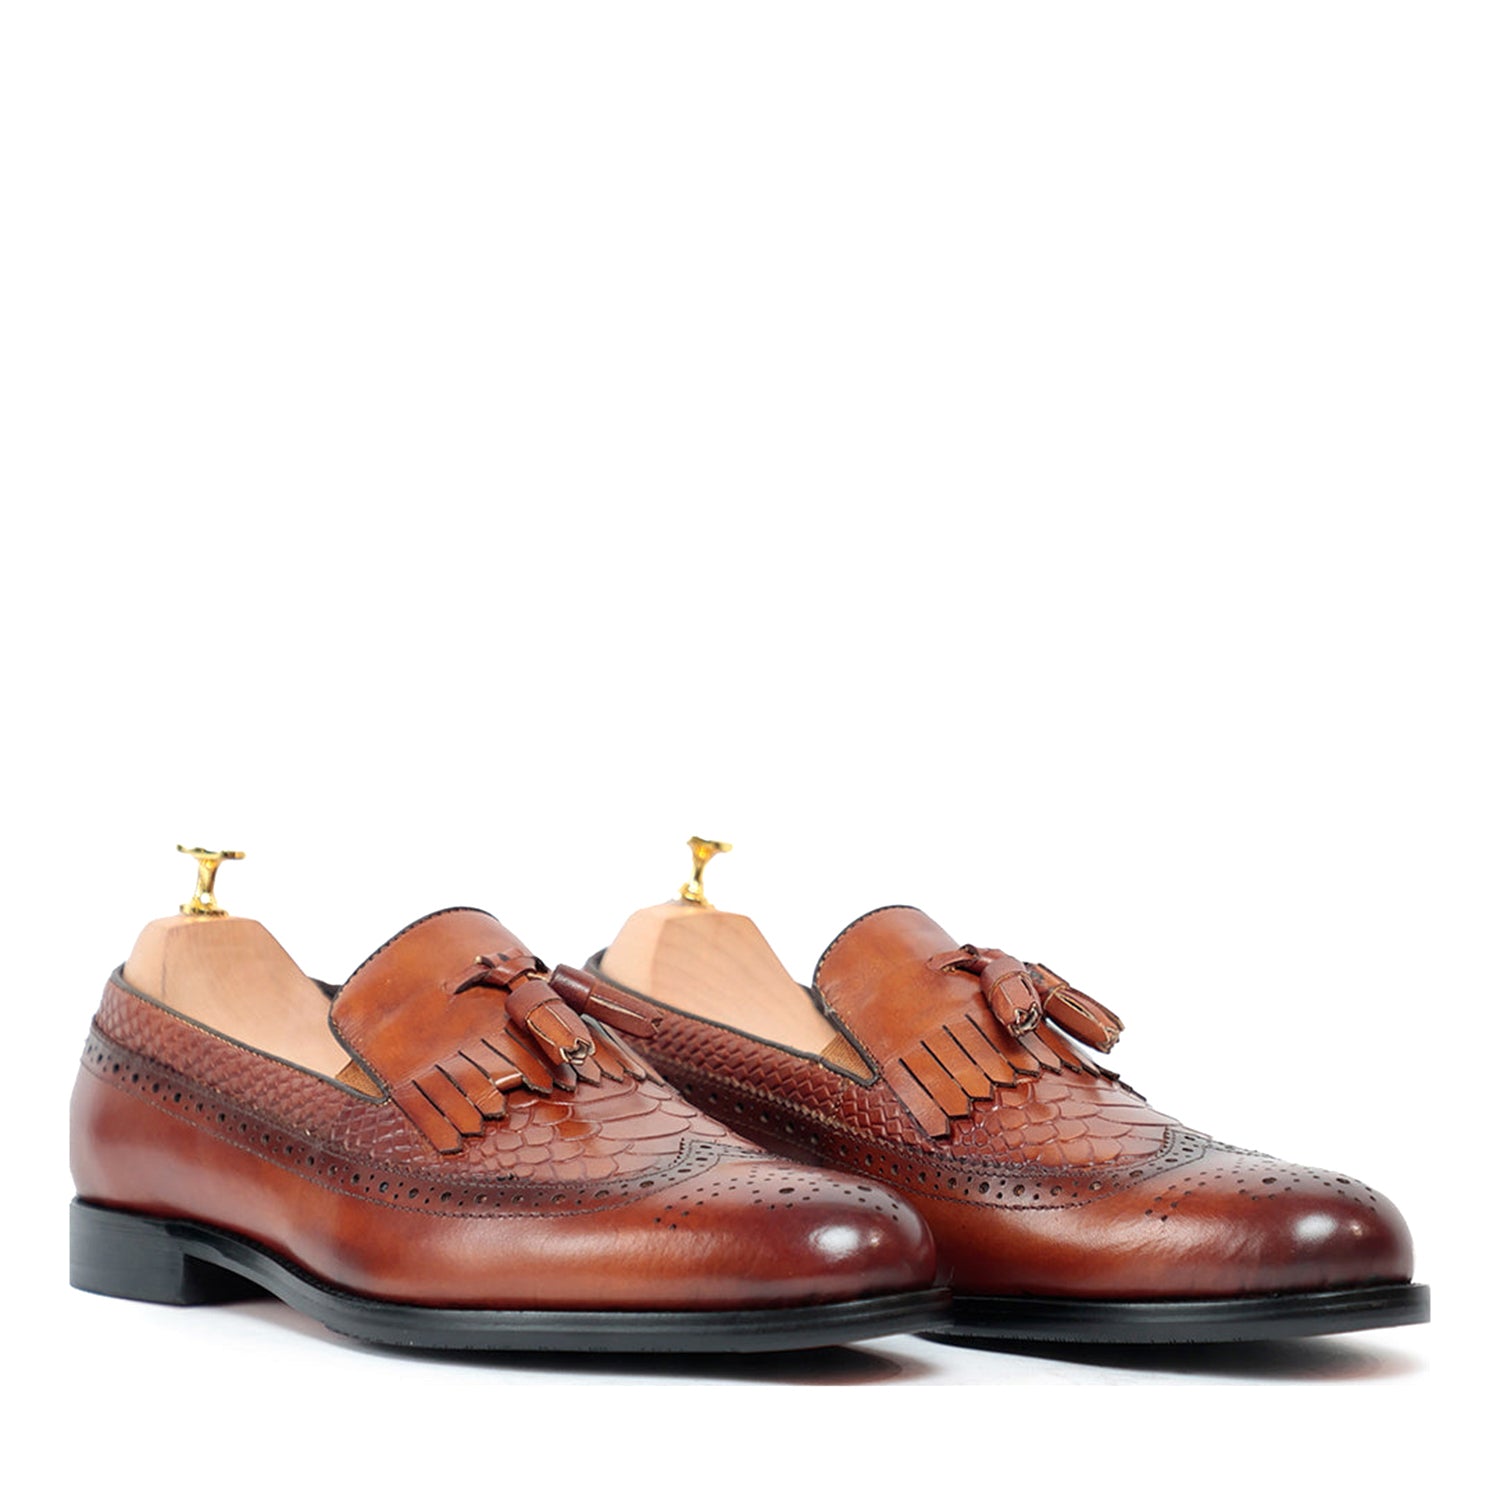 Palermo Brown Loafer Shoes